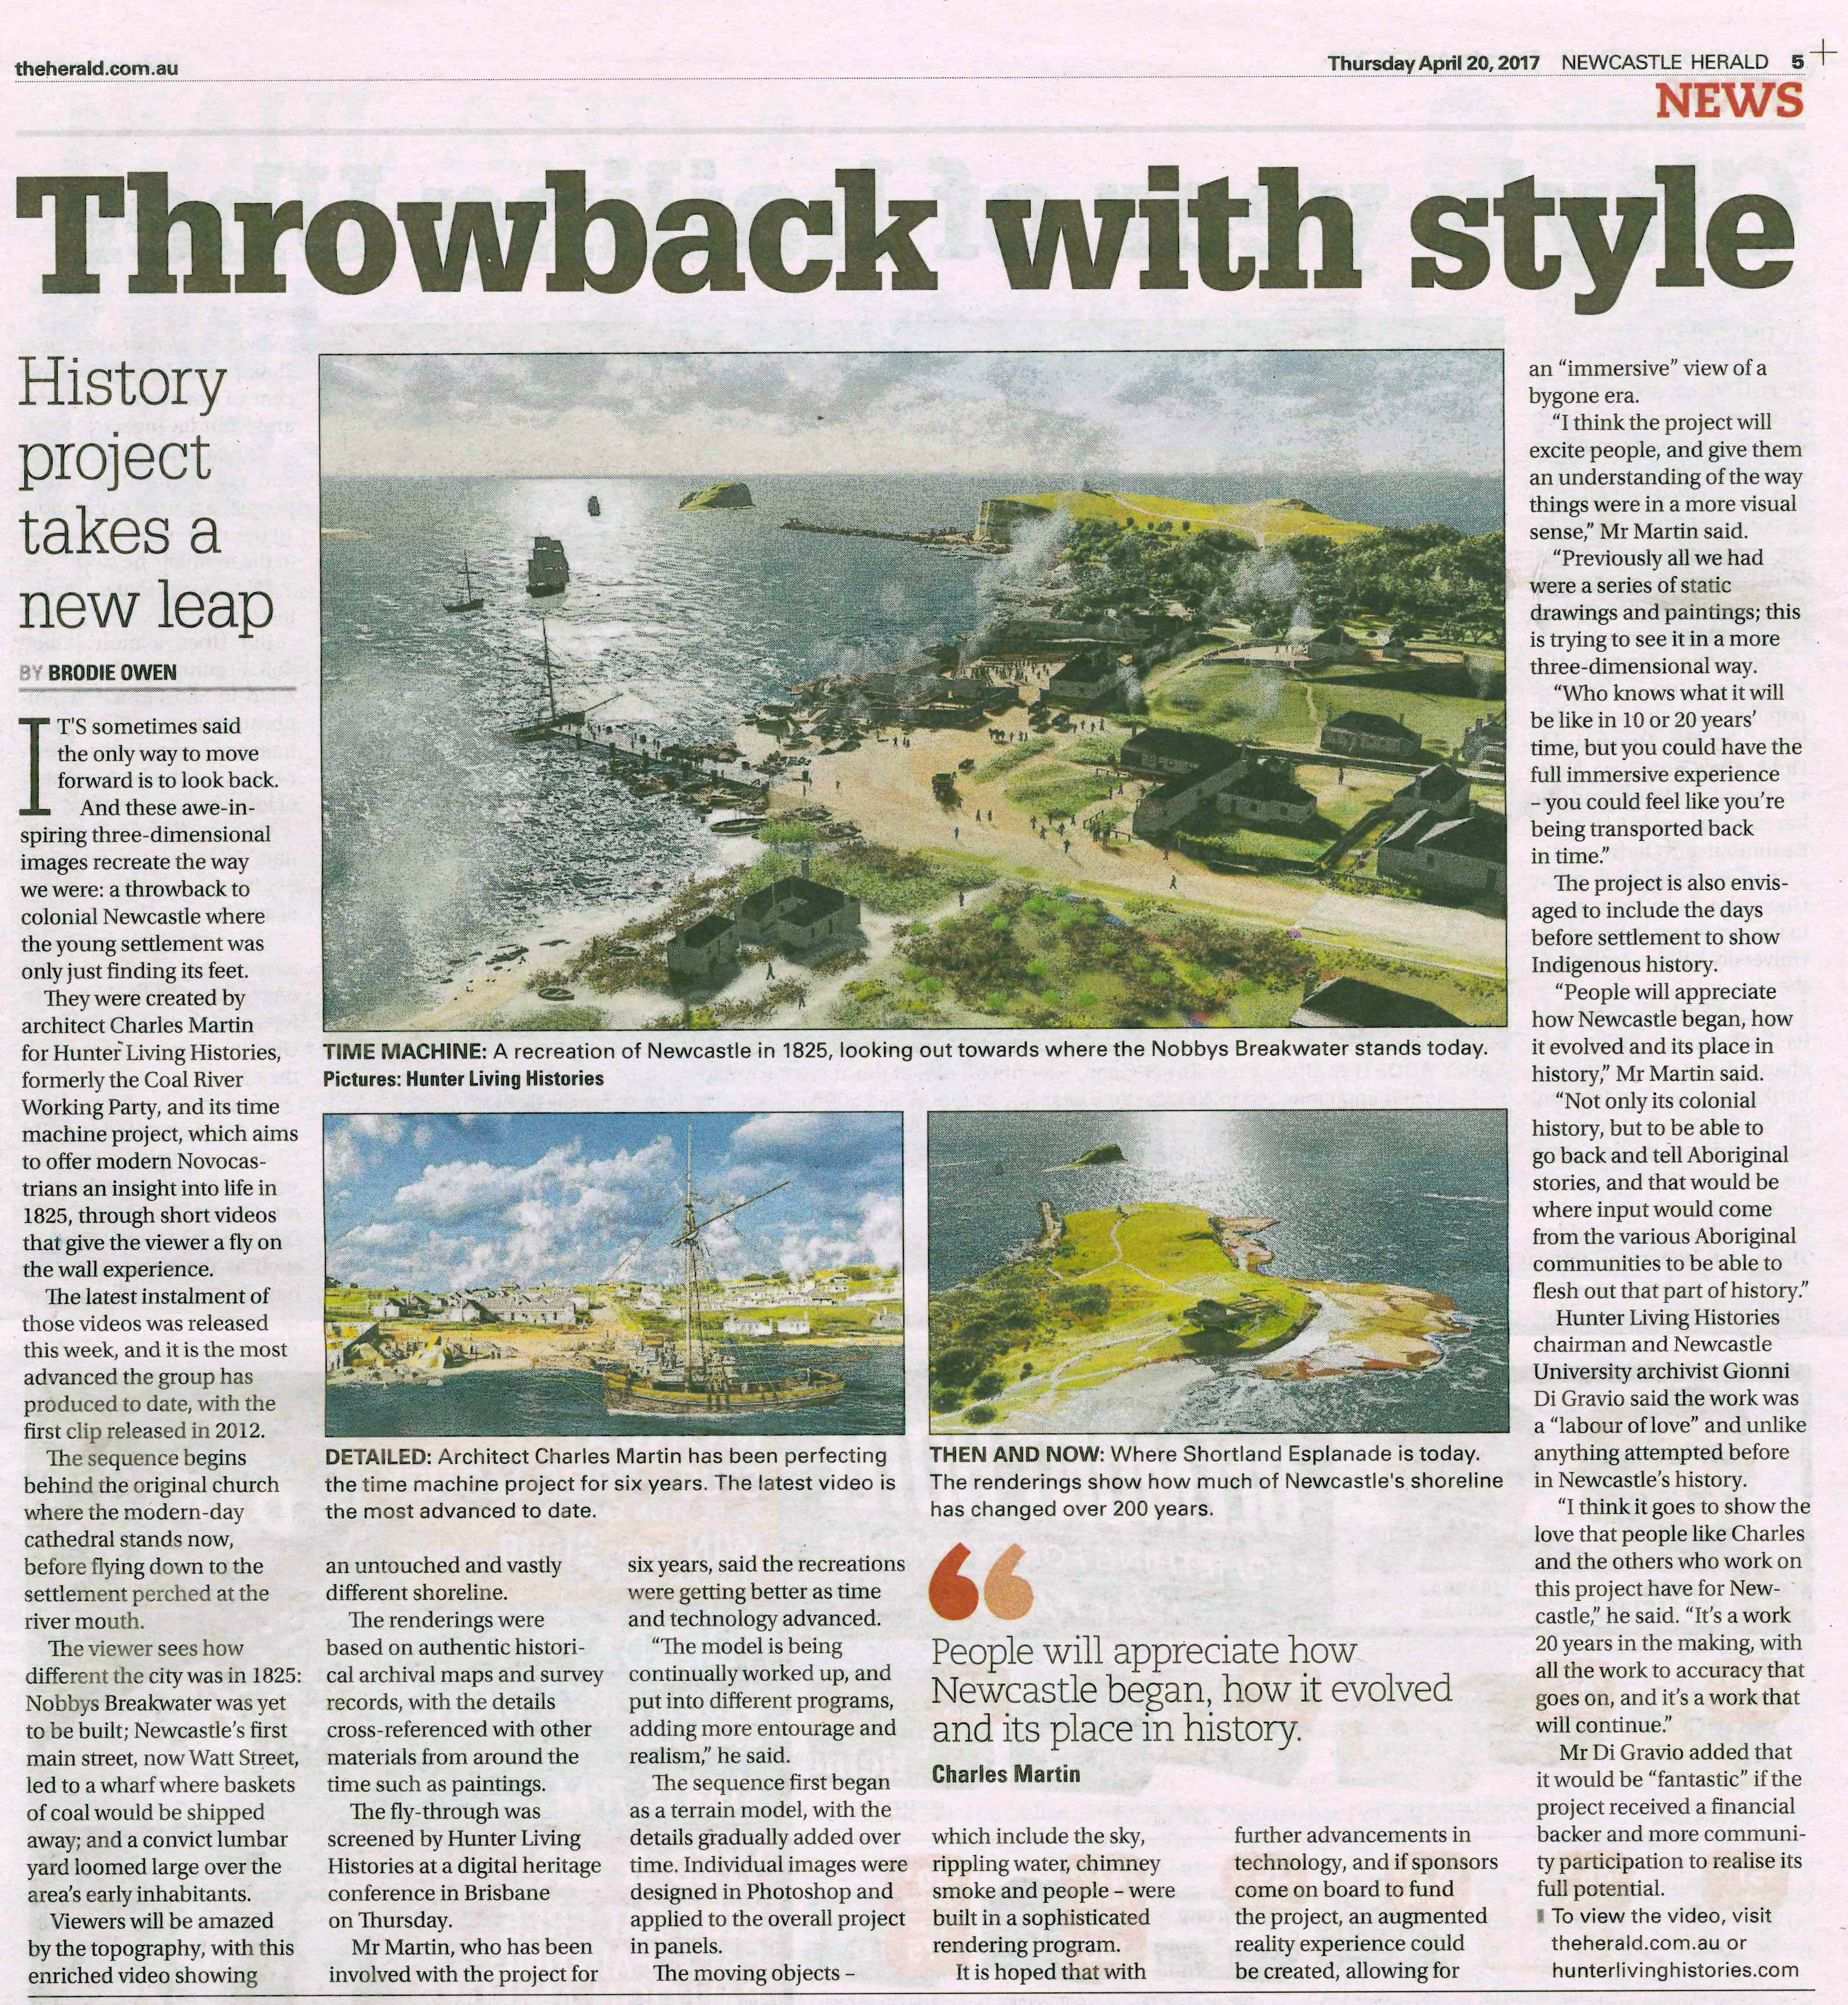 "Throwback with style" Newcastle Herald, p.5 Thursday April 20, 2017.